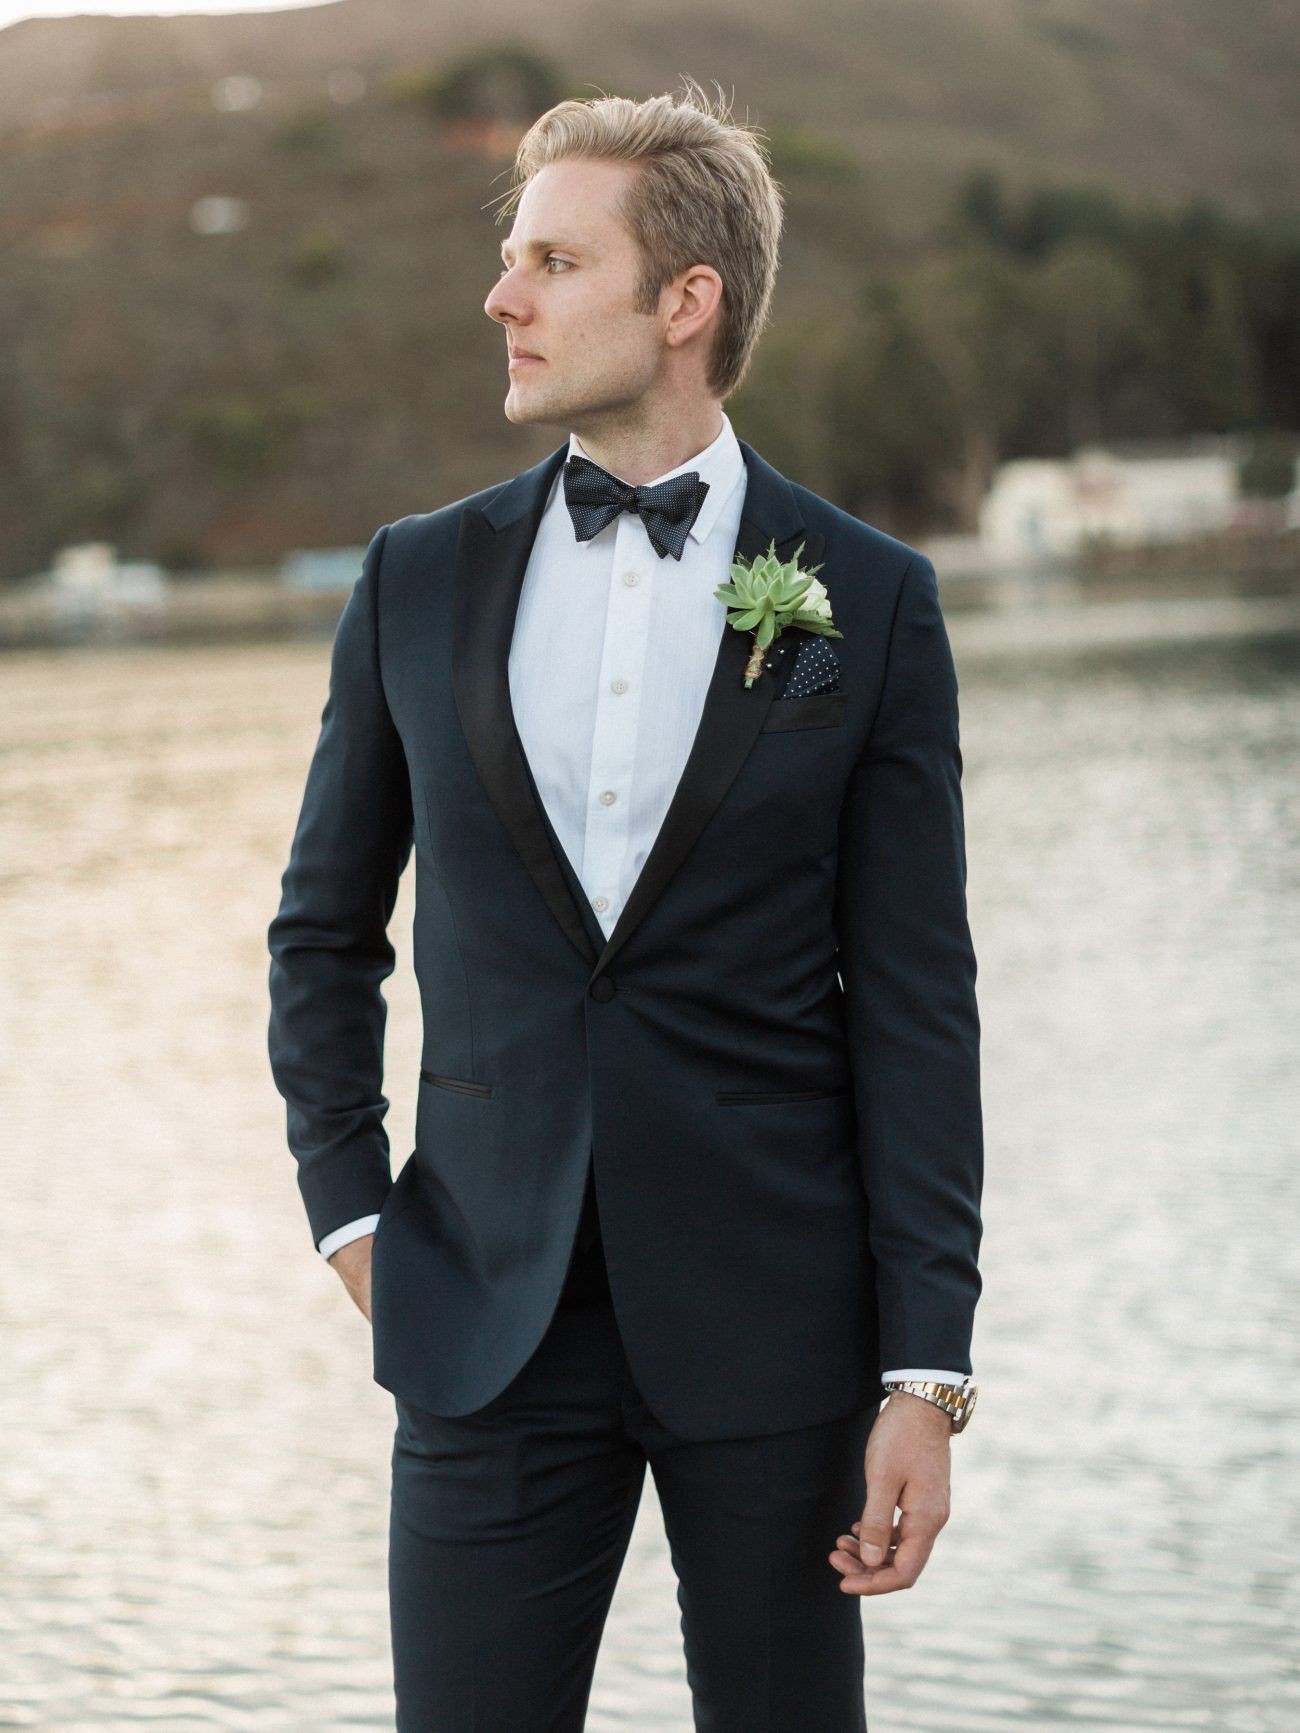 Groom wearing a suit and posing in front of a lake